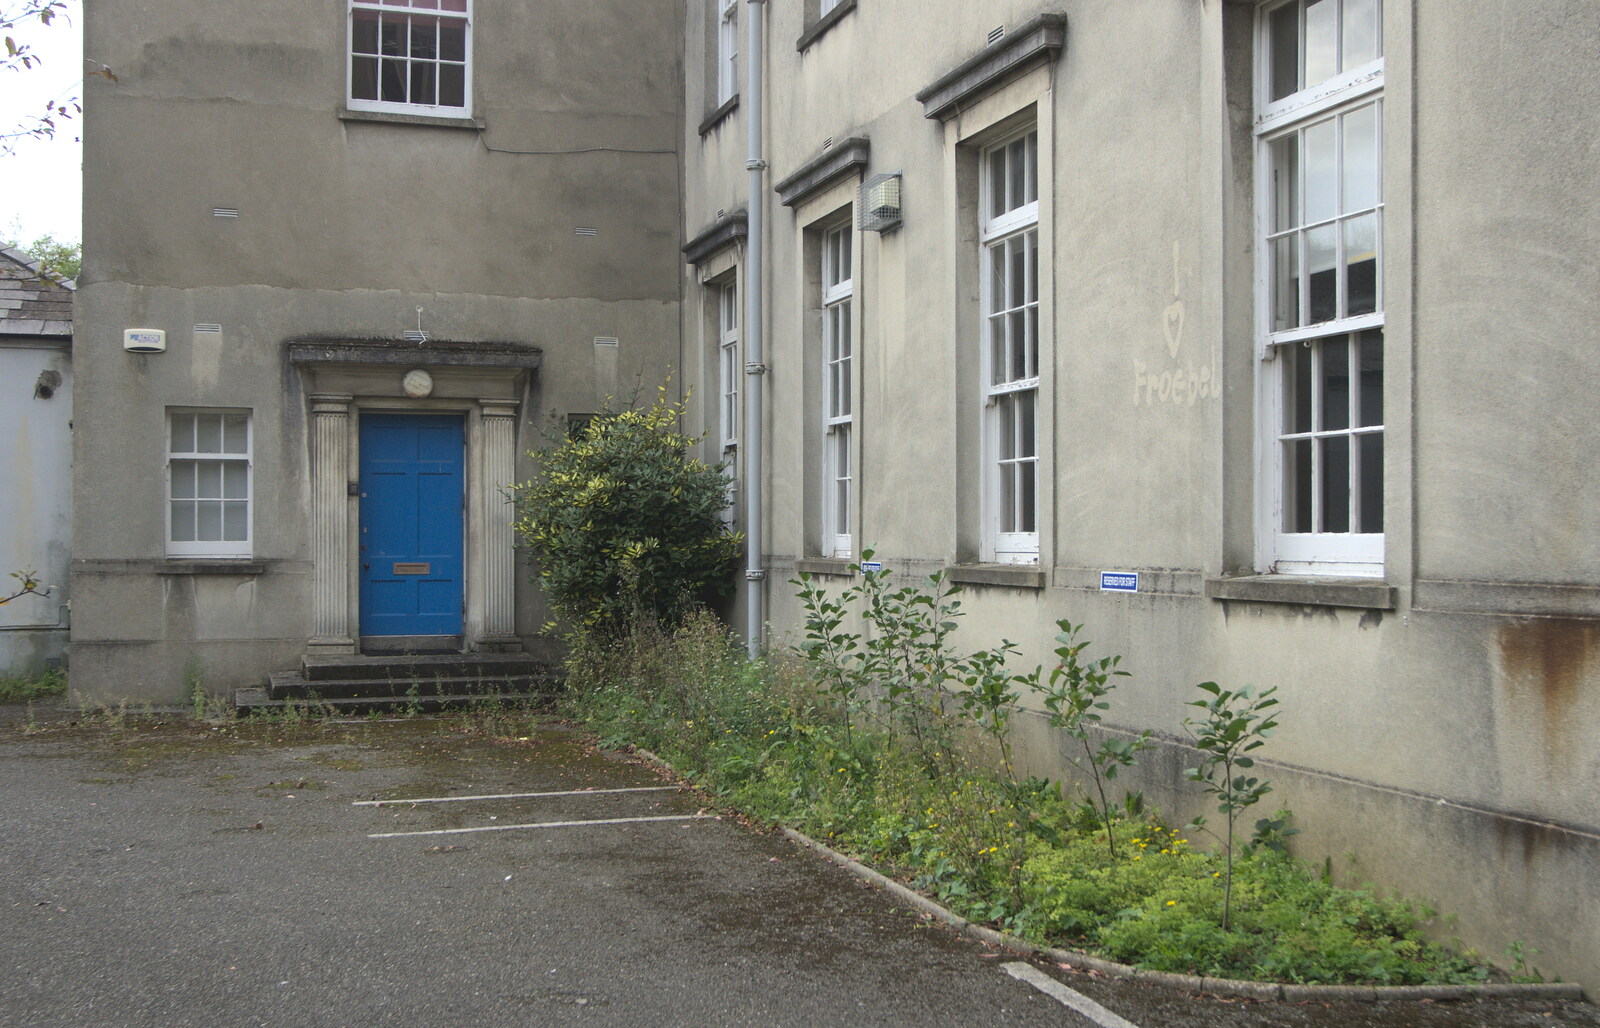 Parts of the school have not yet been renovated from Sion Hill and Blackrock for the Day, Dublin, Ireland - 17th September 2016